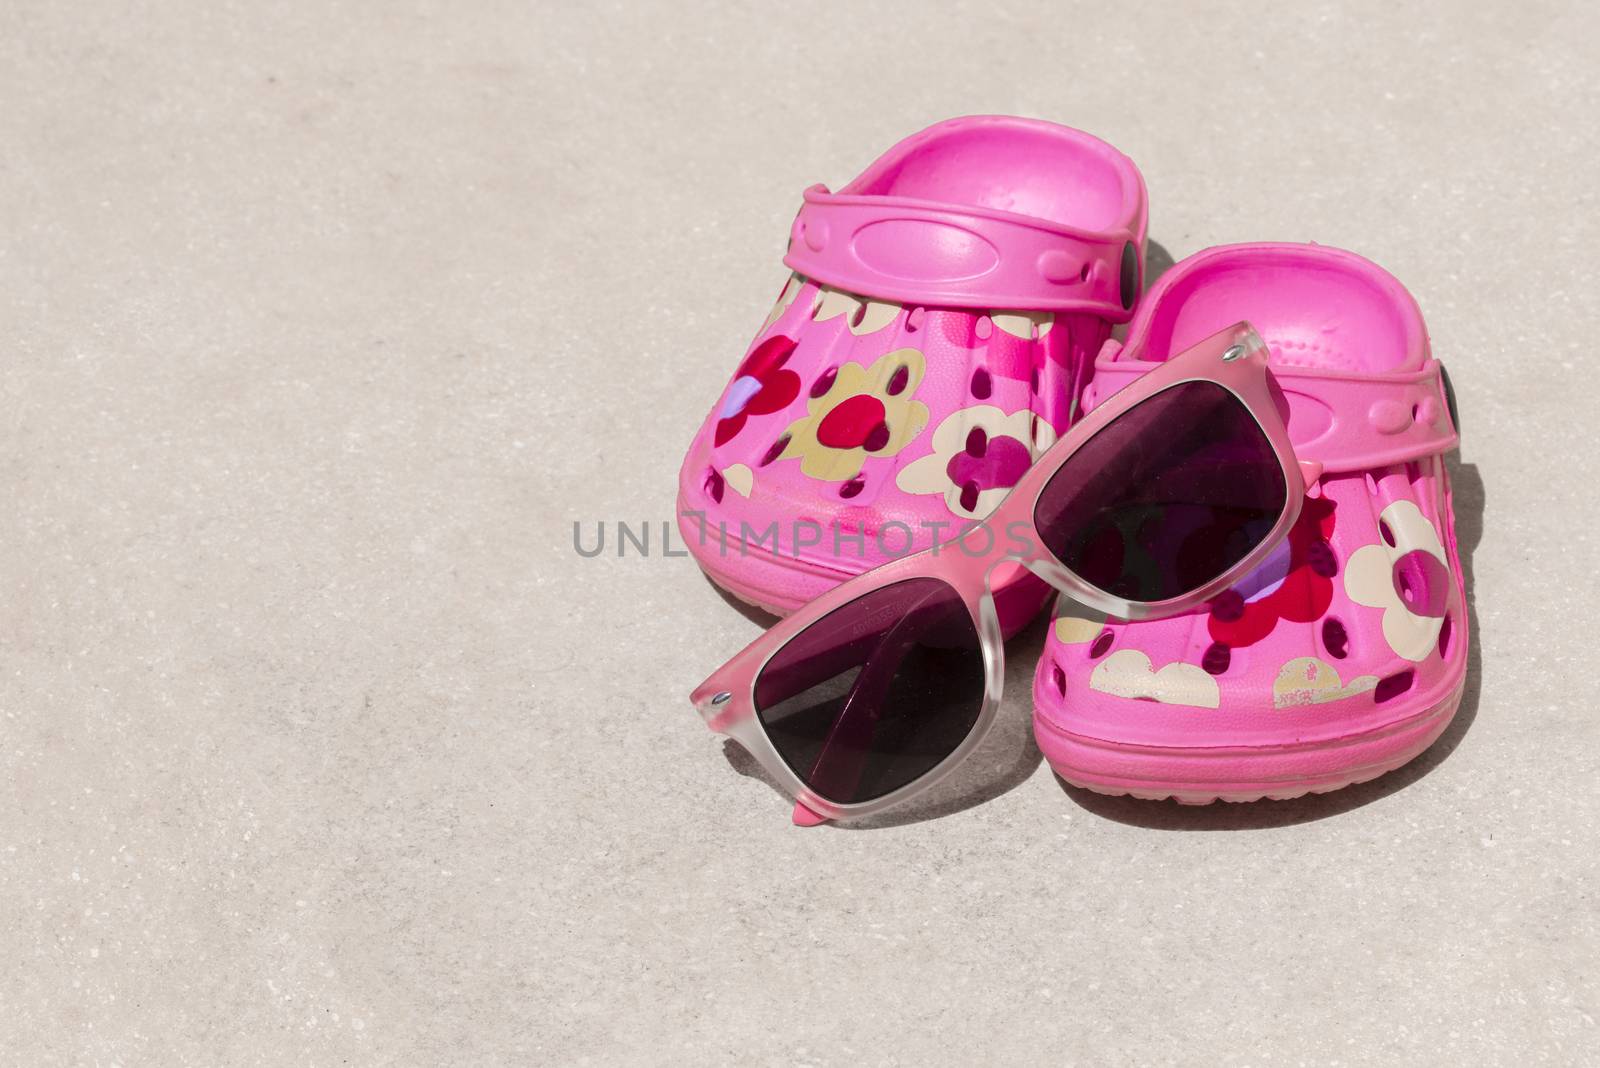 Pink beach kid's crocs and sunglasses on sandy beach.Beach sandals and sunglasses in the foreground and blurred sea in the background.